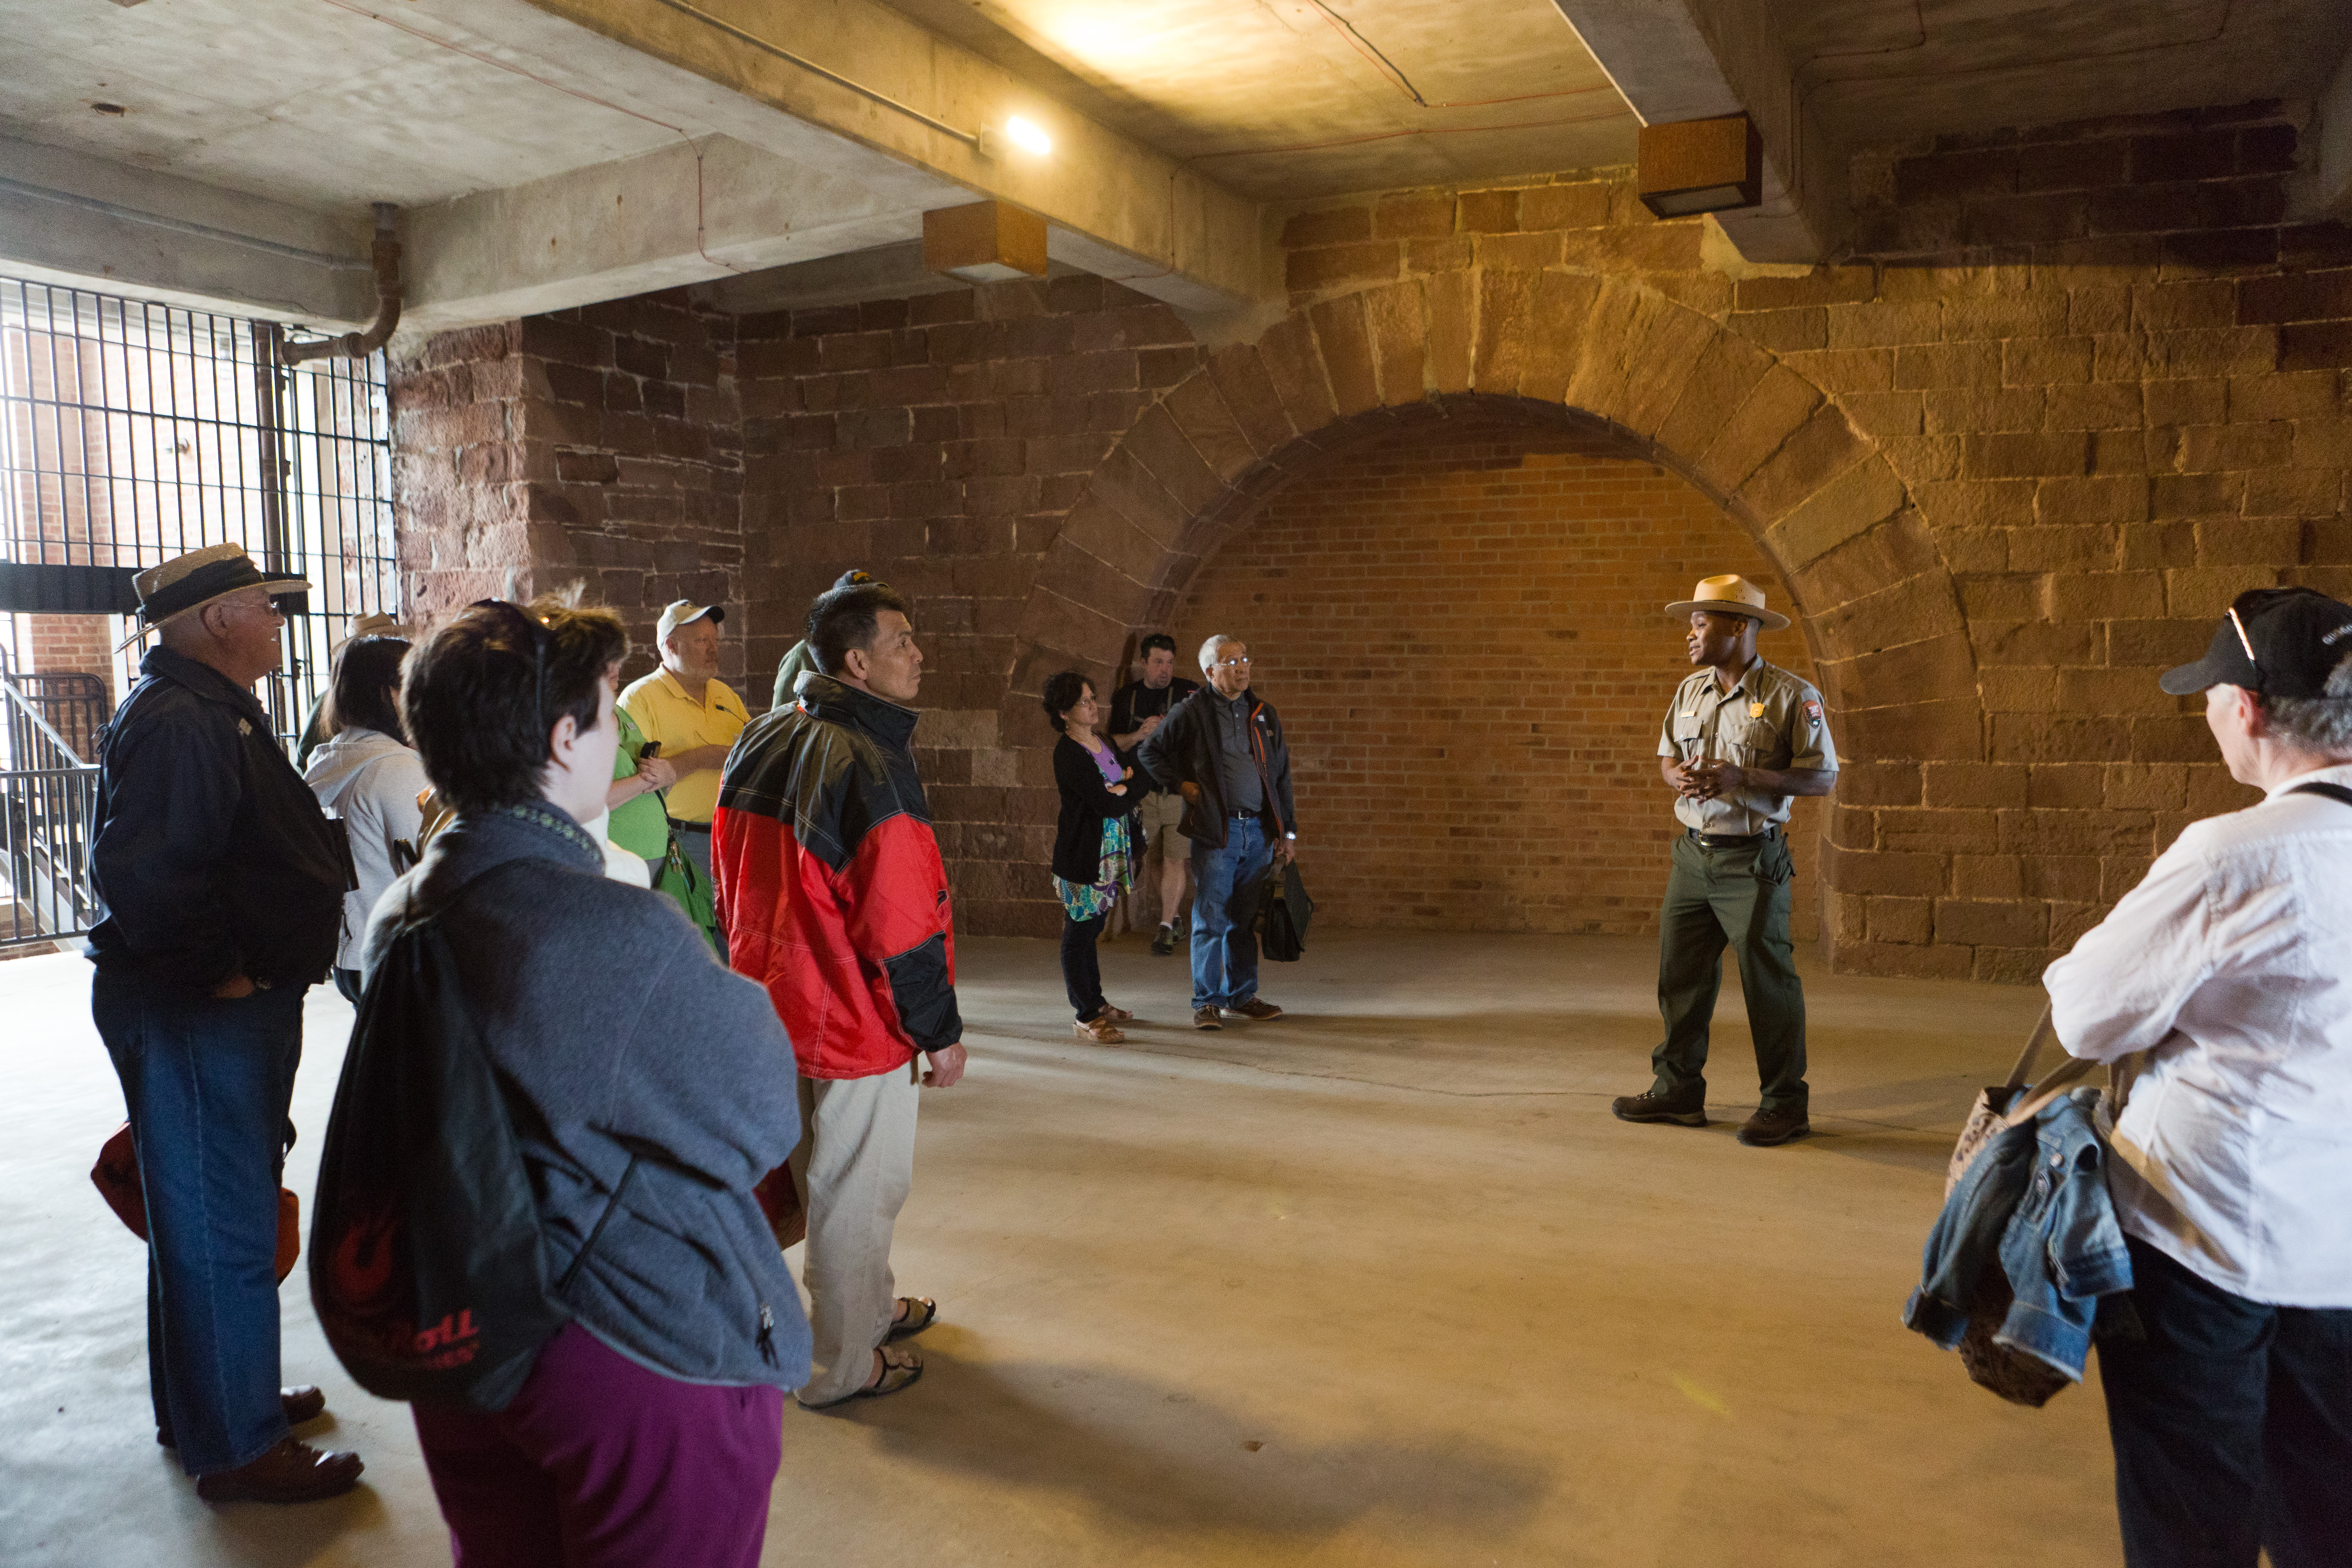 A park ranger talking to a group of visitors inside a large stone room in a fort.